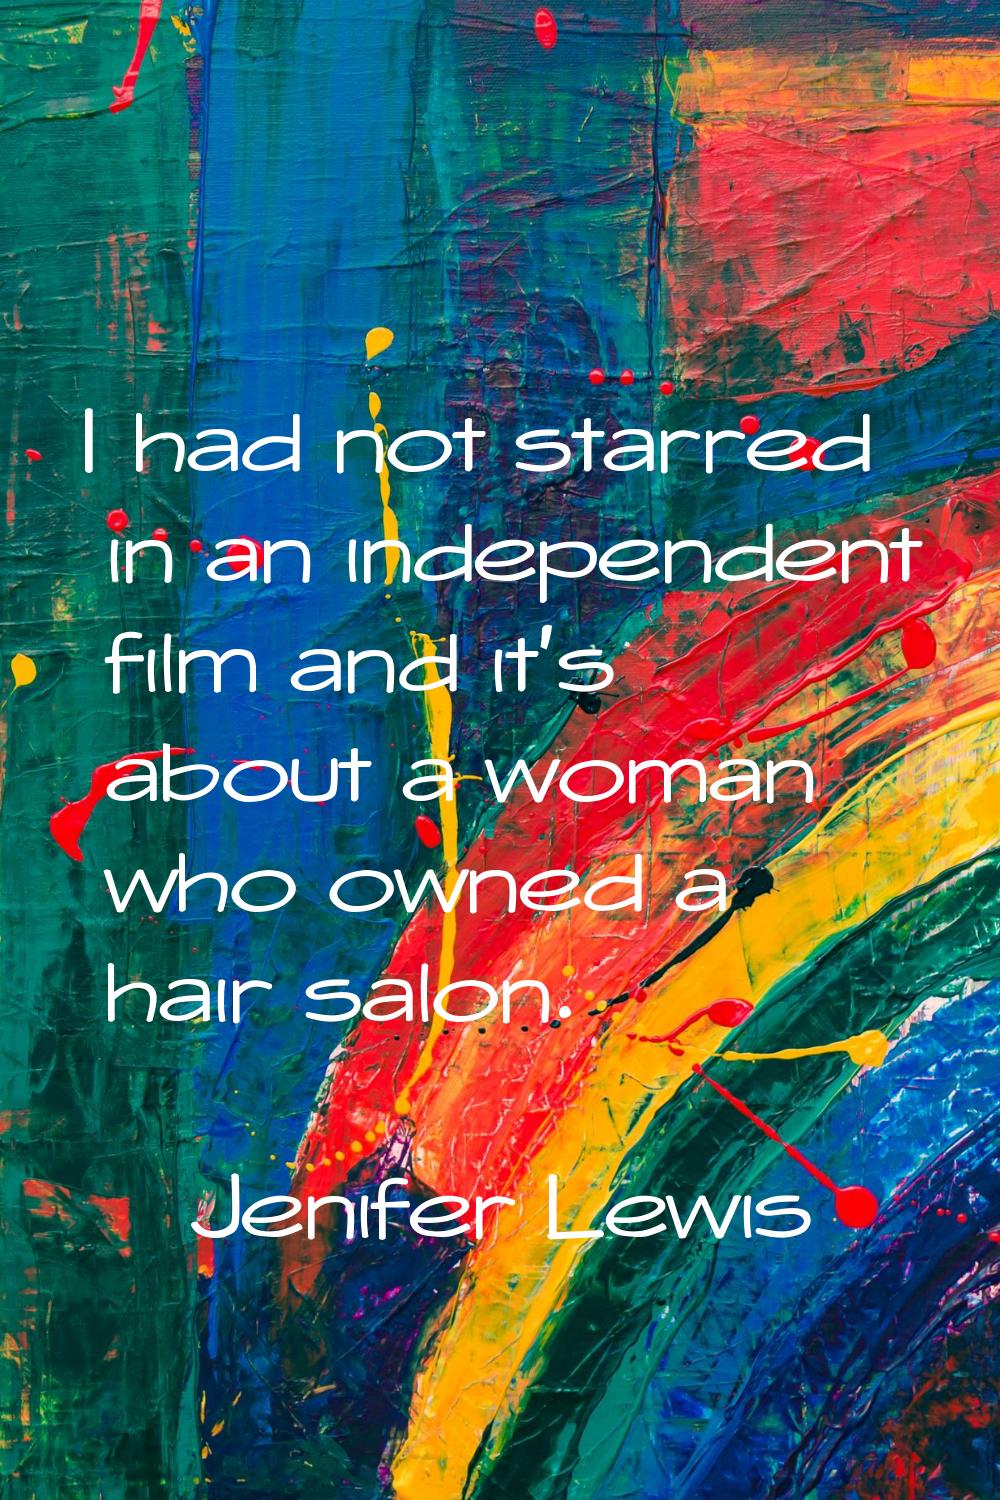 I had not starred in an independent film and it's about a woman who owned a hair salon.